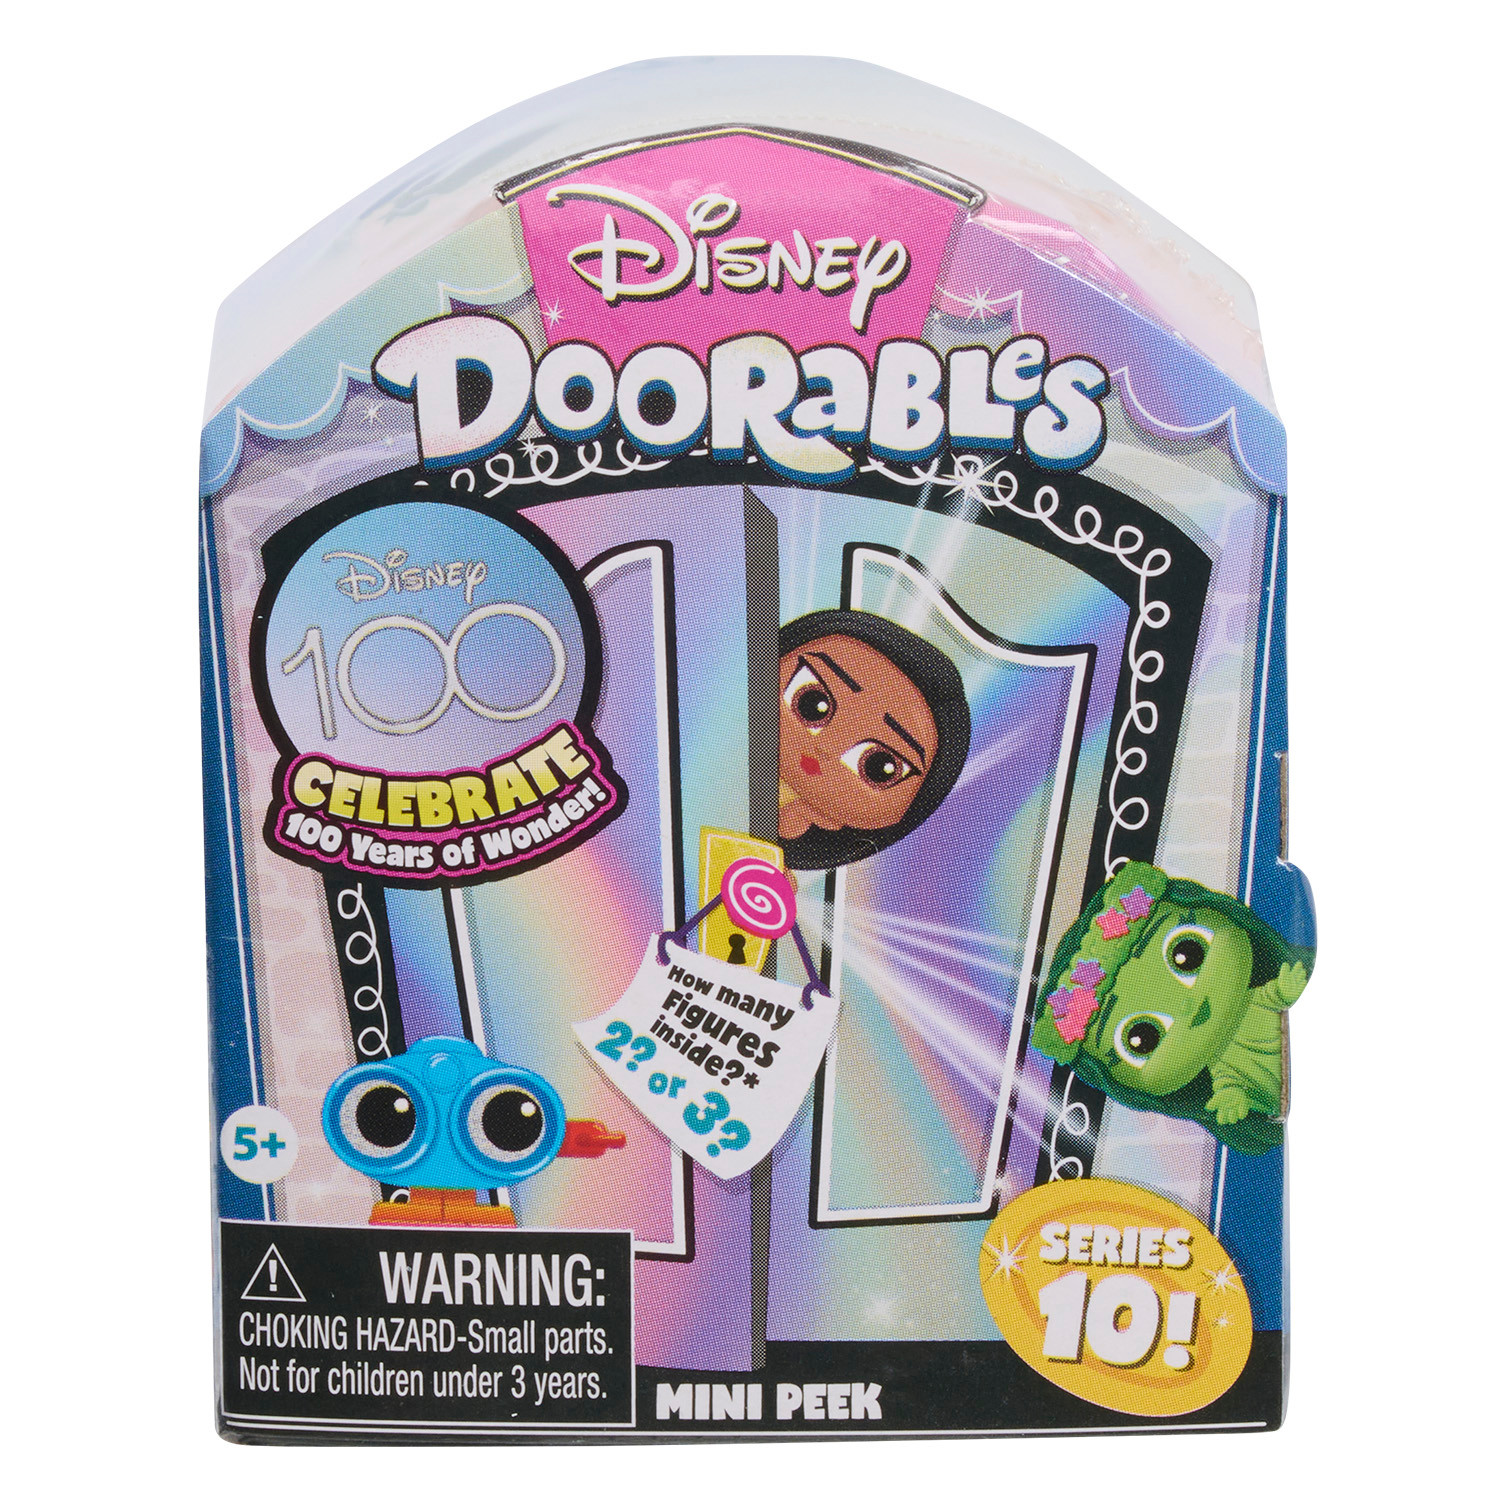 Disney Doorables NEW Mini Peek Series 10, Collectible Blind Bag Figures, Styles May Vary, Kids Toys for Ages 5 up - image 1 of 7